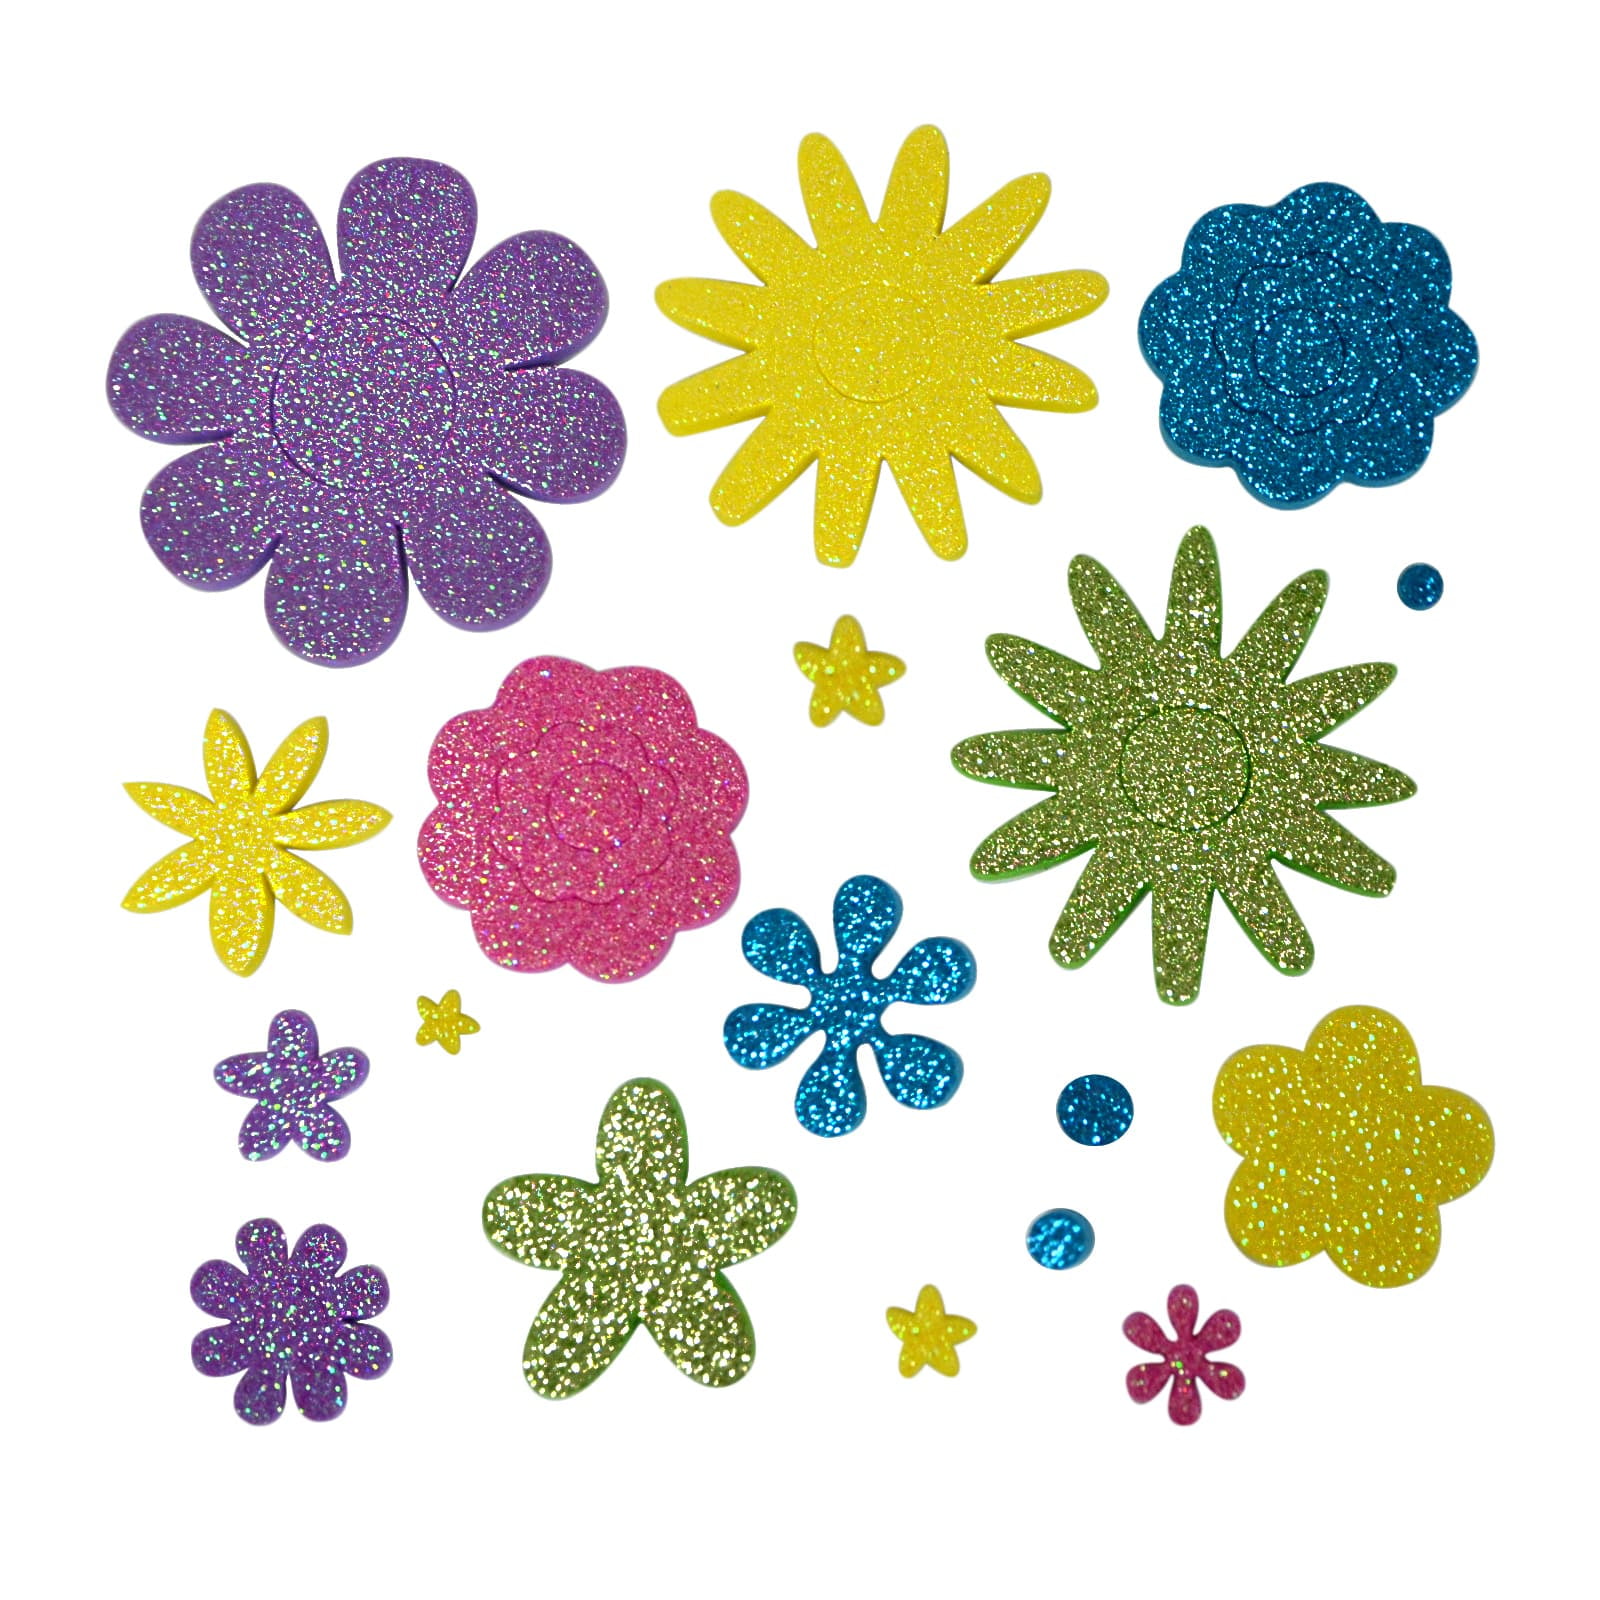 Incraftables Glitter Foam Stickers for Kids Self Adhesive 100pcs Assorted  Flower Heart Star Glitter Butterfly Sparkly for Arts Crafts Adults